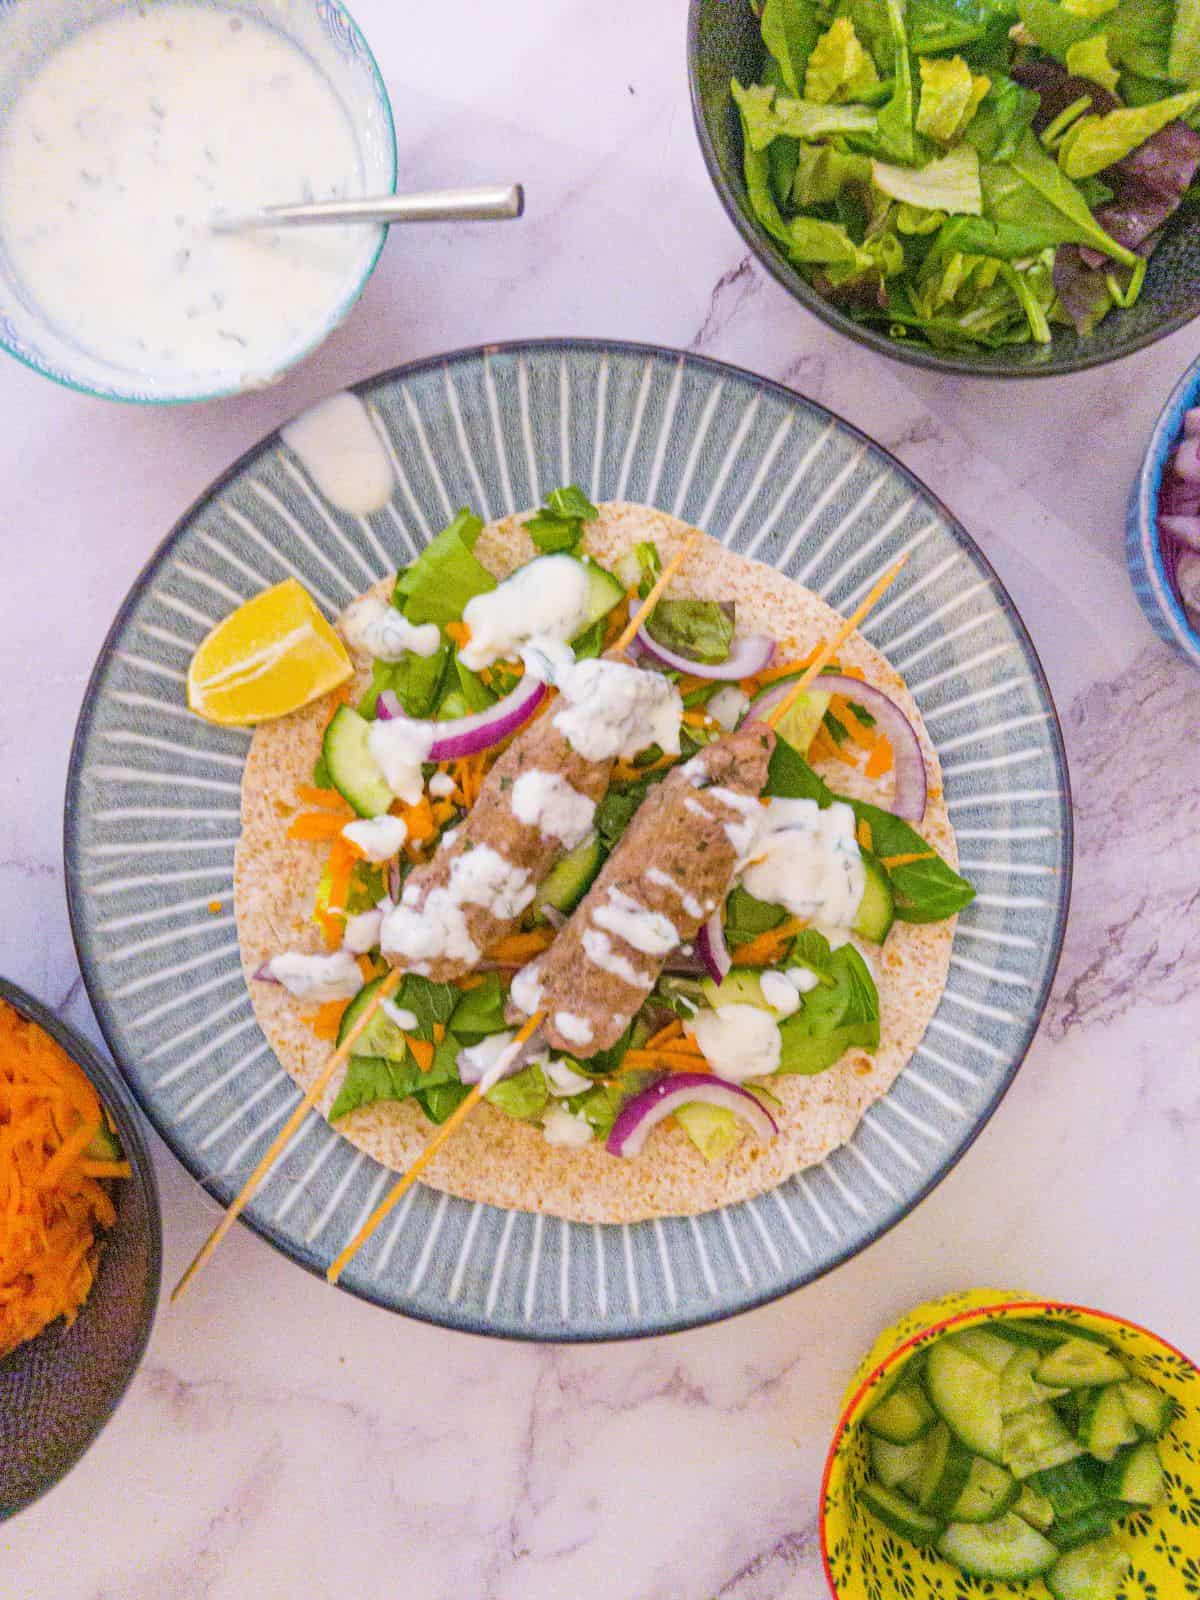 Lamb kofta kebab on a blue plate with a wedge of lemon and toppings in bowls in the background.